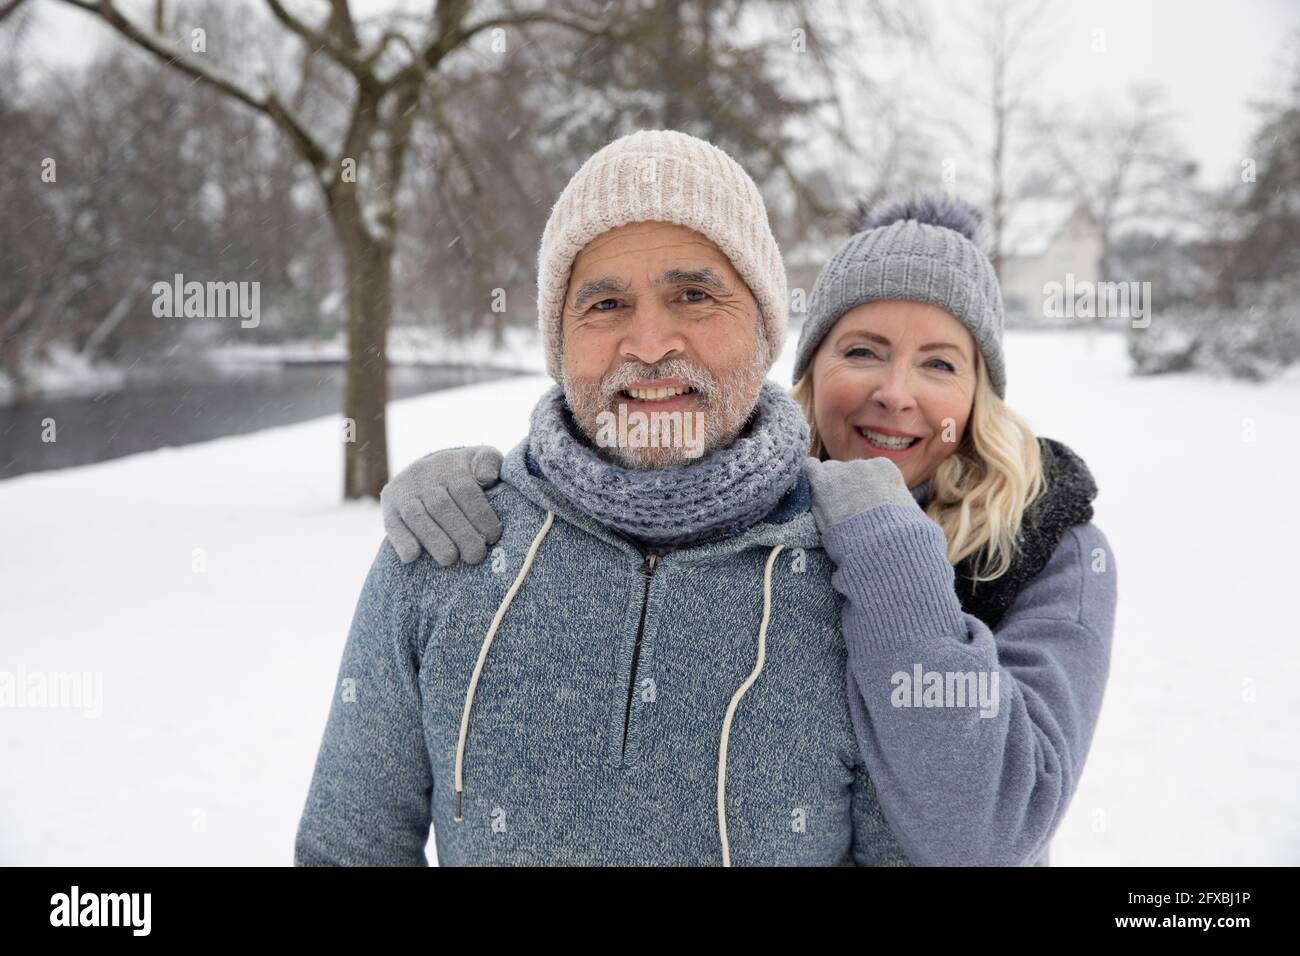 Smiling woman in warm clothing standing with man at park Stock Photo